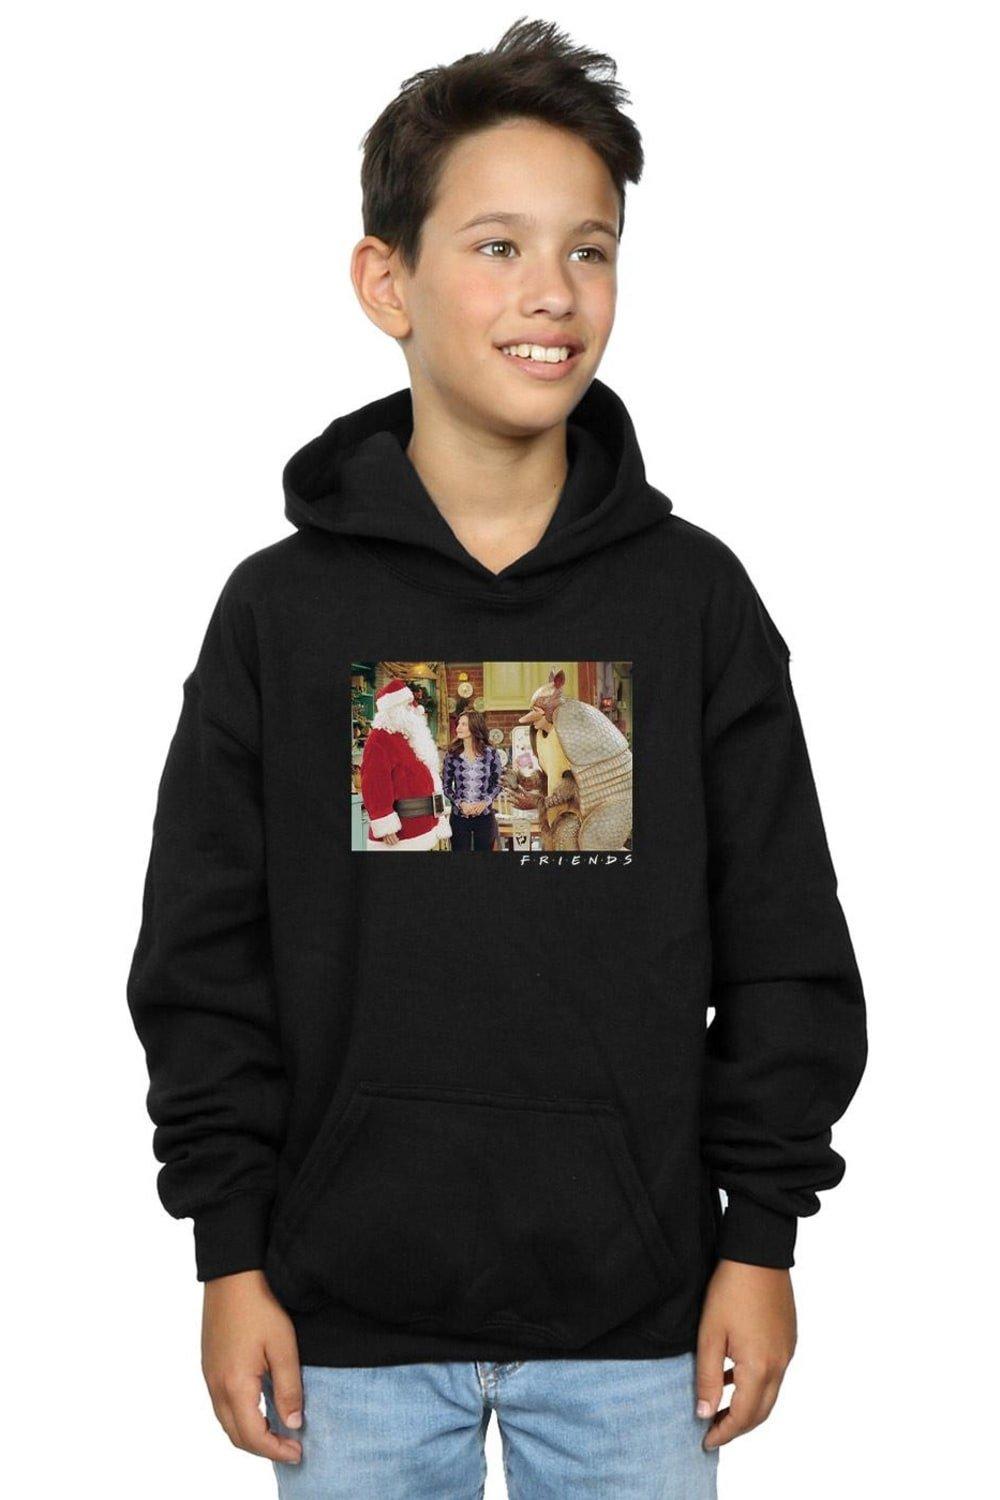 The Holiday Armadillo Hoodie